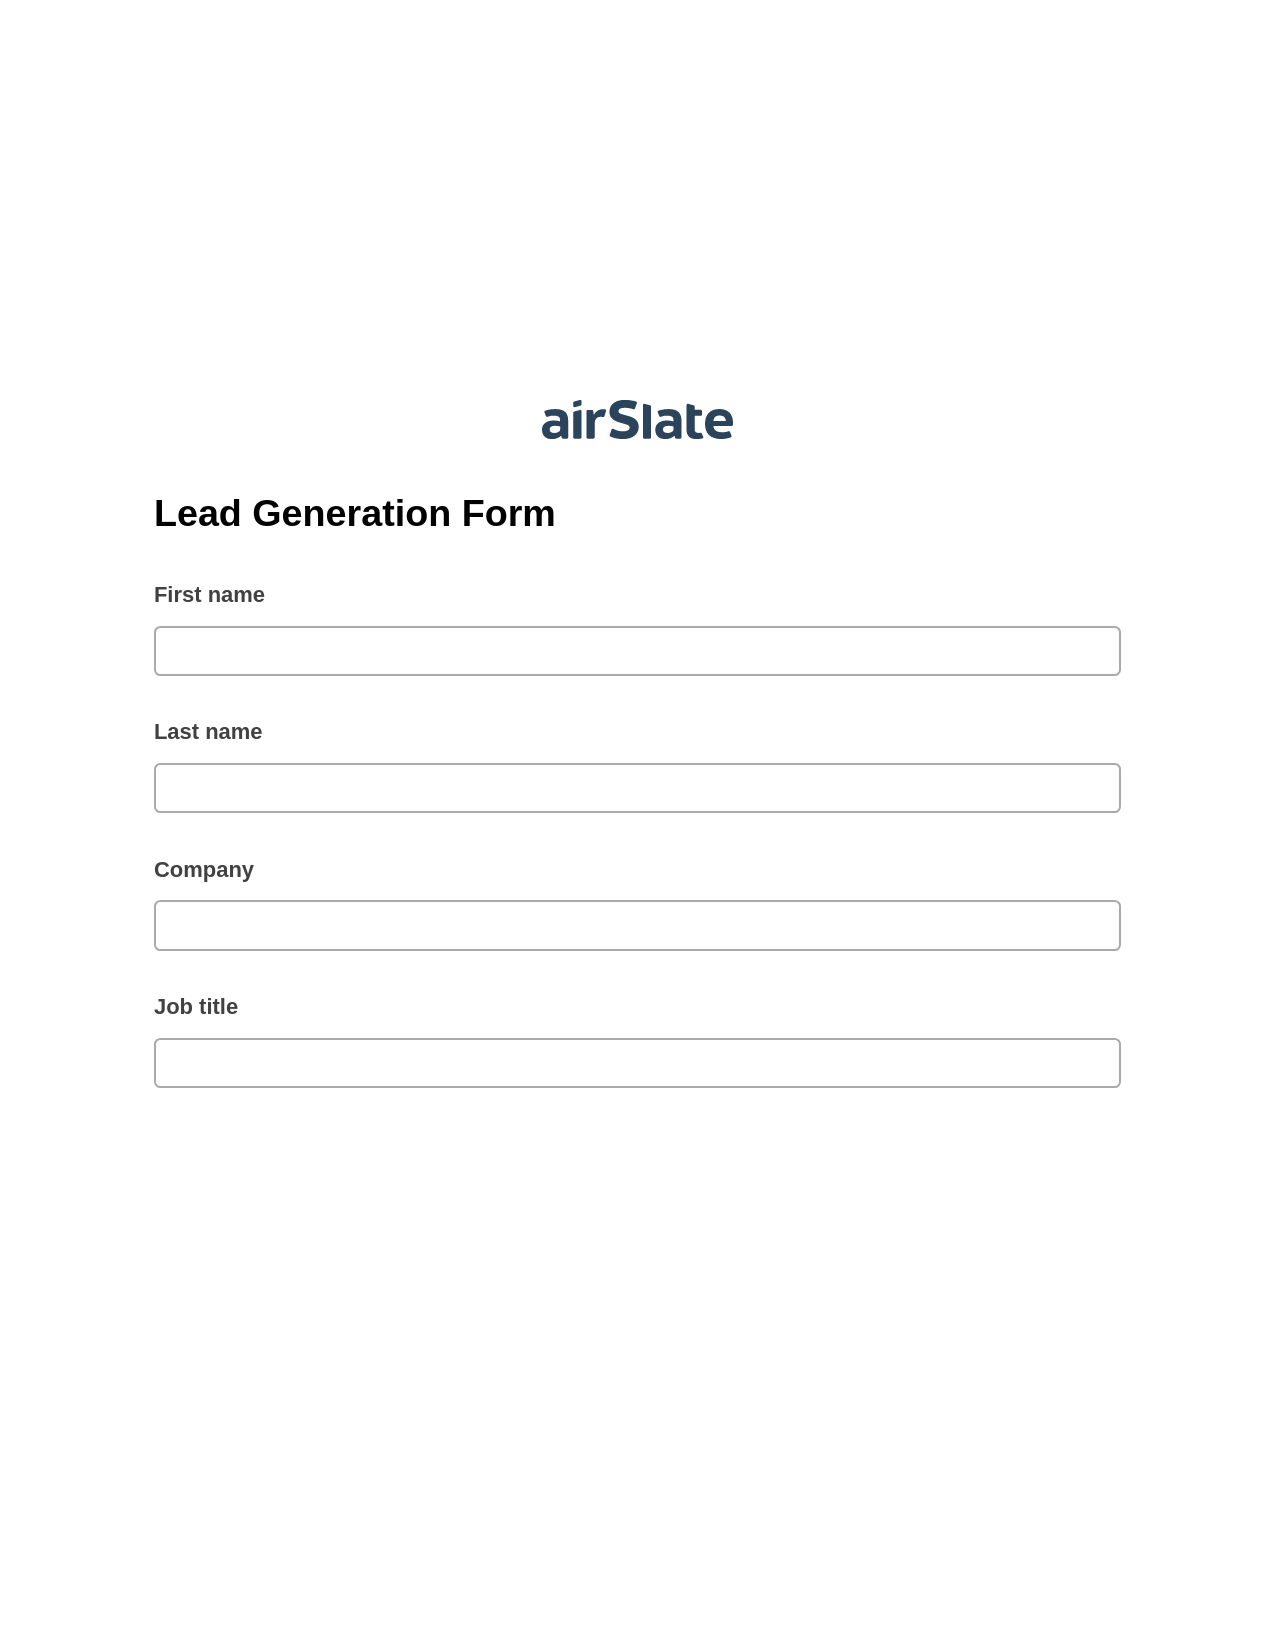 Multirole Lead Generation Form Pre-fill from Salesforce Records with SOQL Bot, System Bot - Create a Slate in another Flow, Post-finish Document Bot